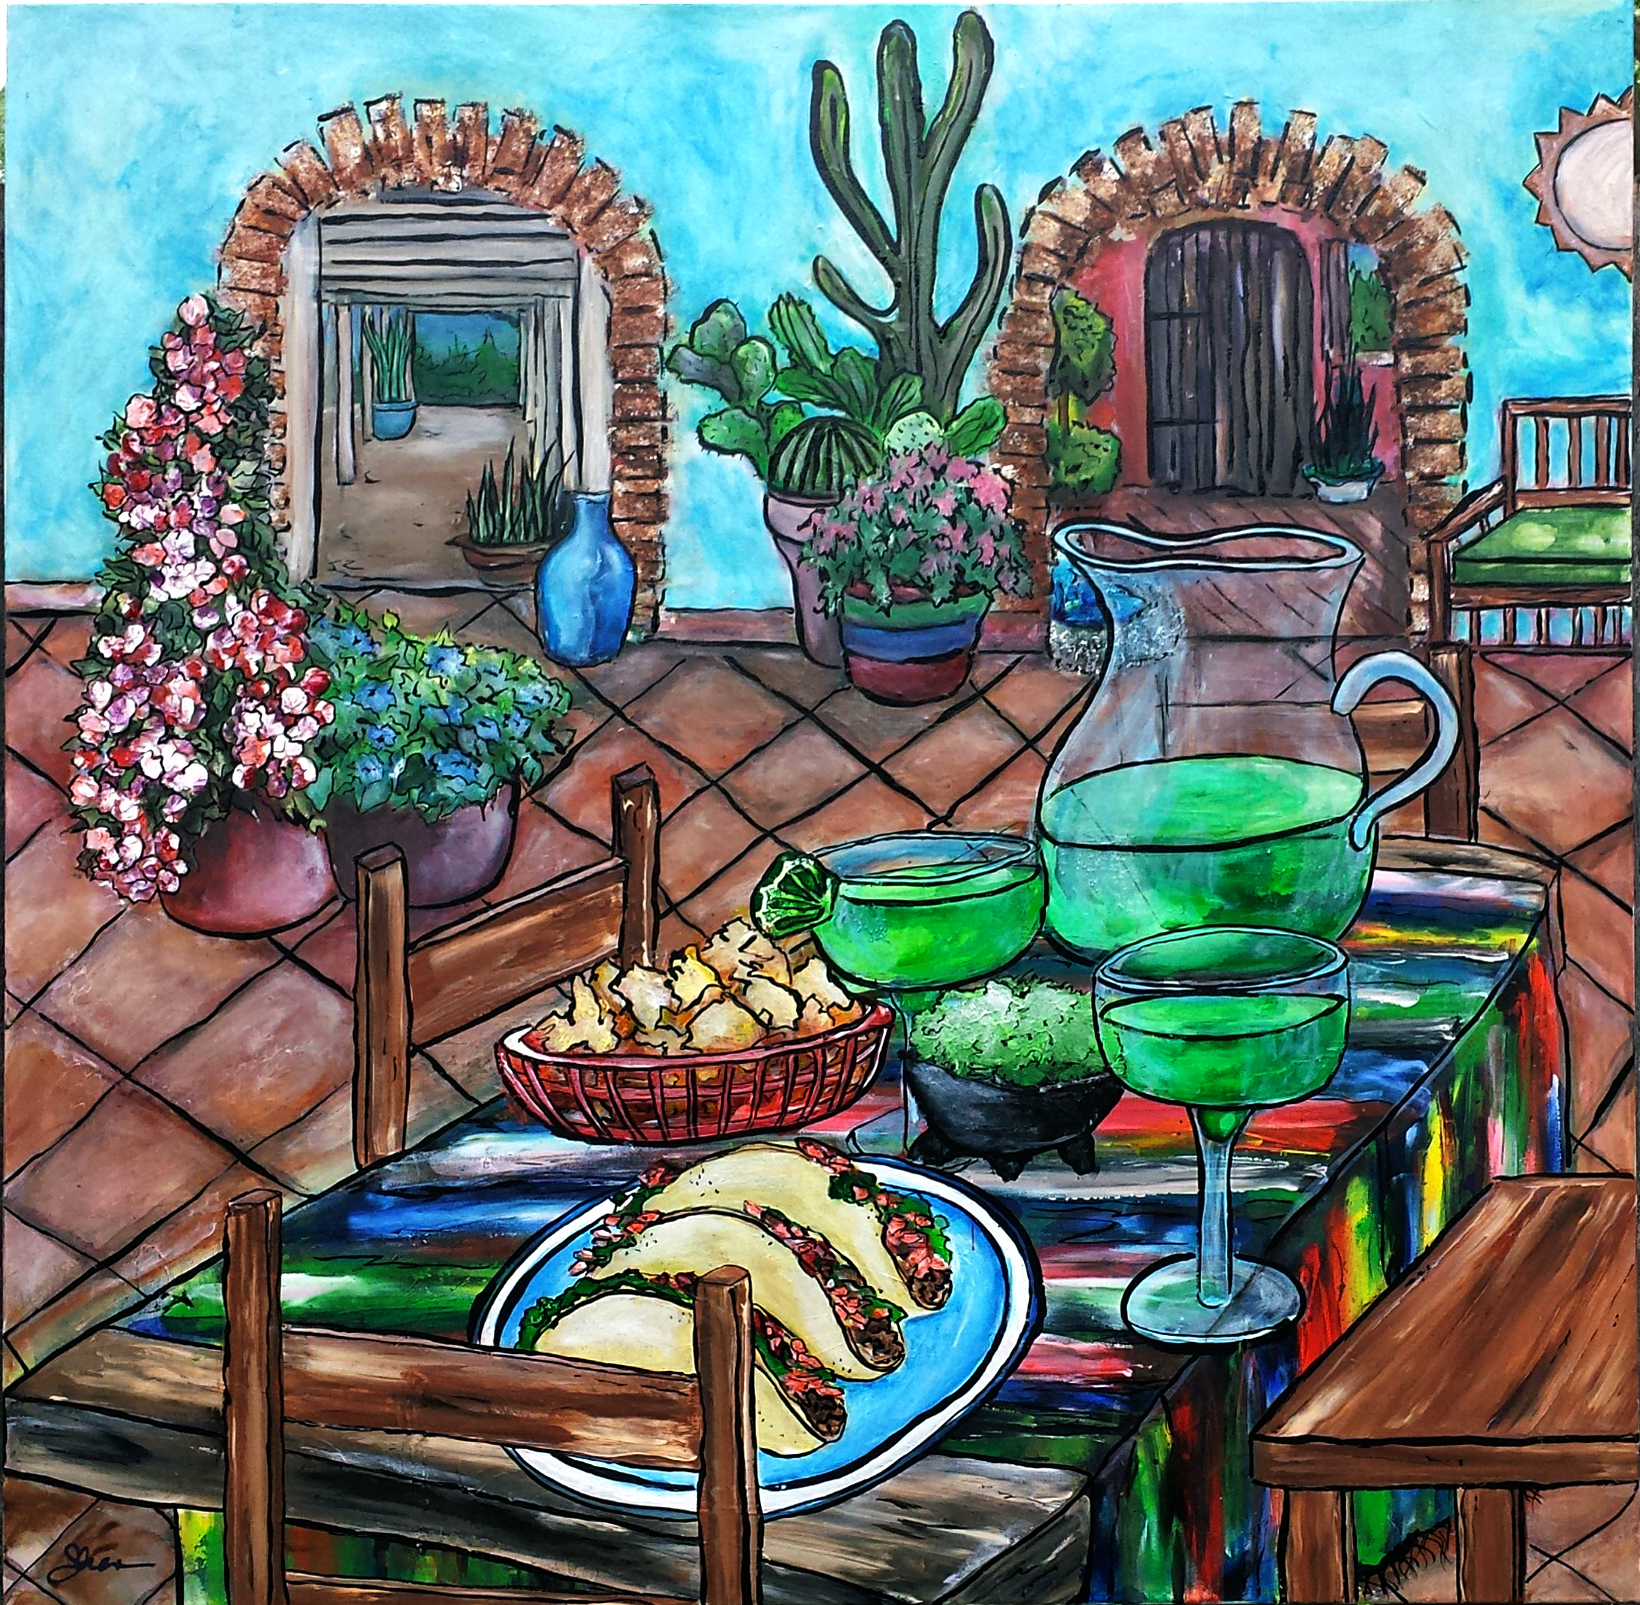 Tacos and Tequila by artist Shannon Fannin